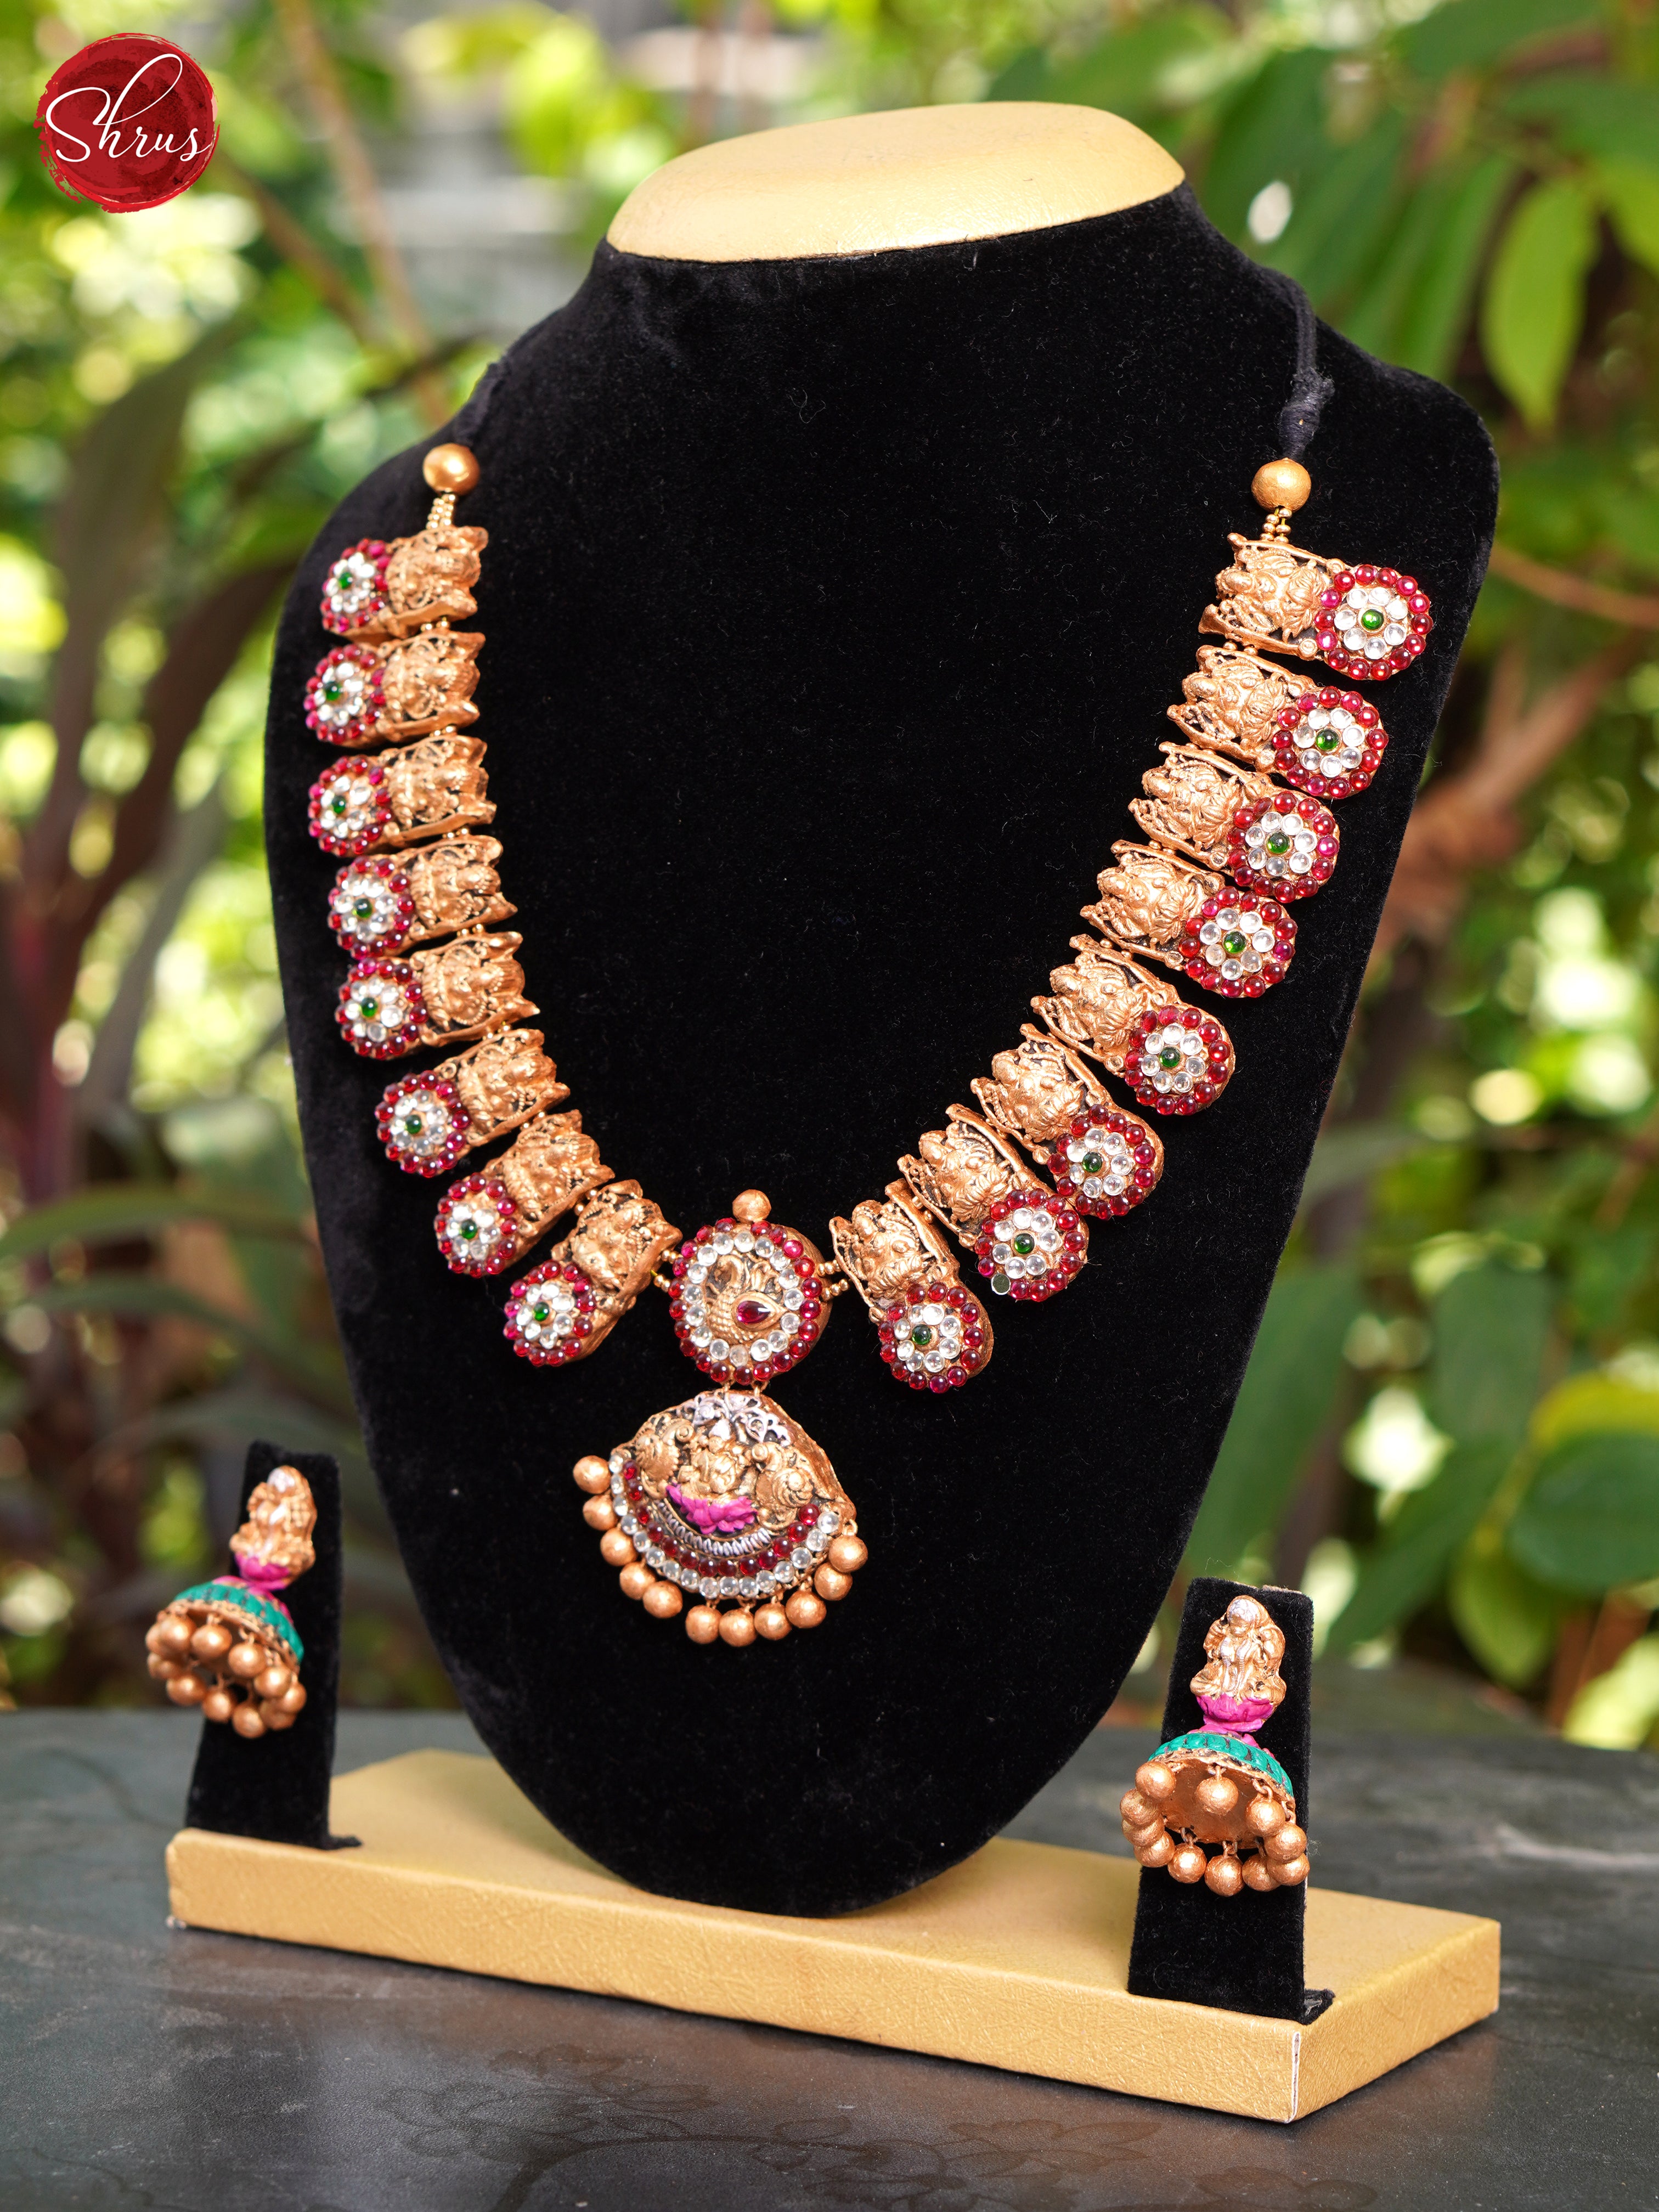 Handcrafted Lakshmi terracotta Necklace  with Jhumkas - Accessories - Shop on ShrusEternity.com